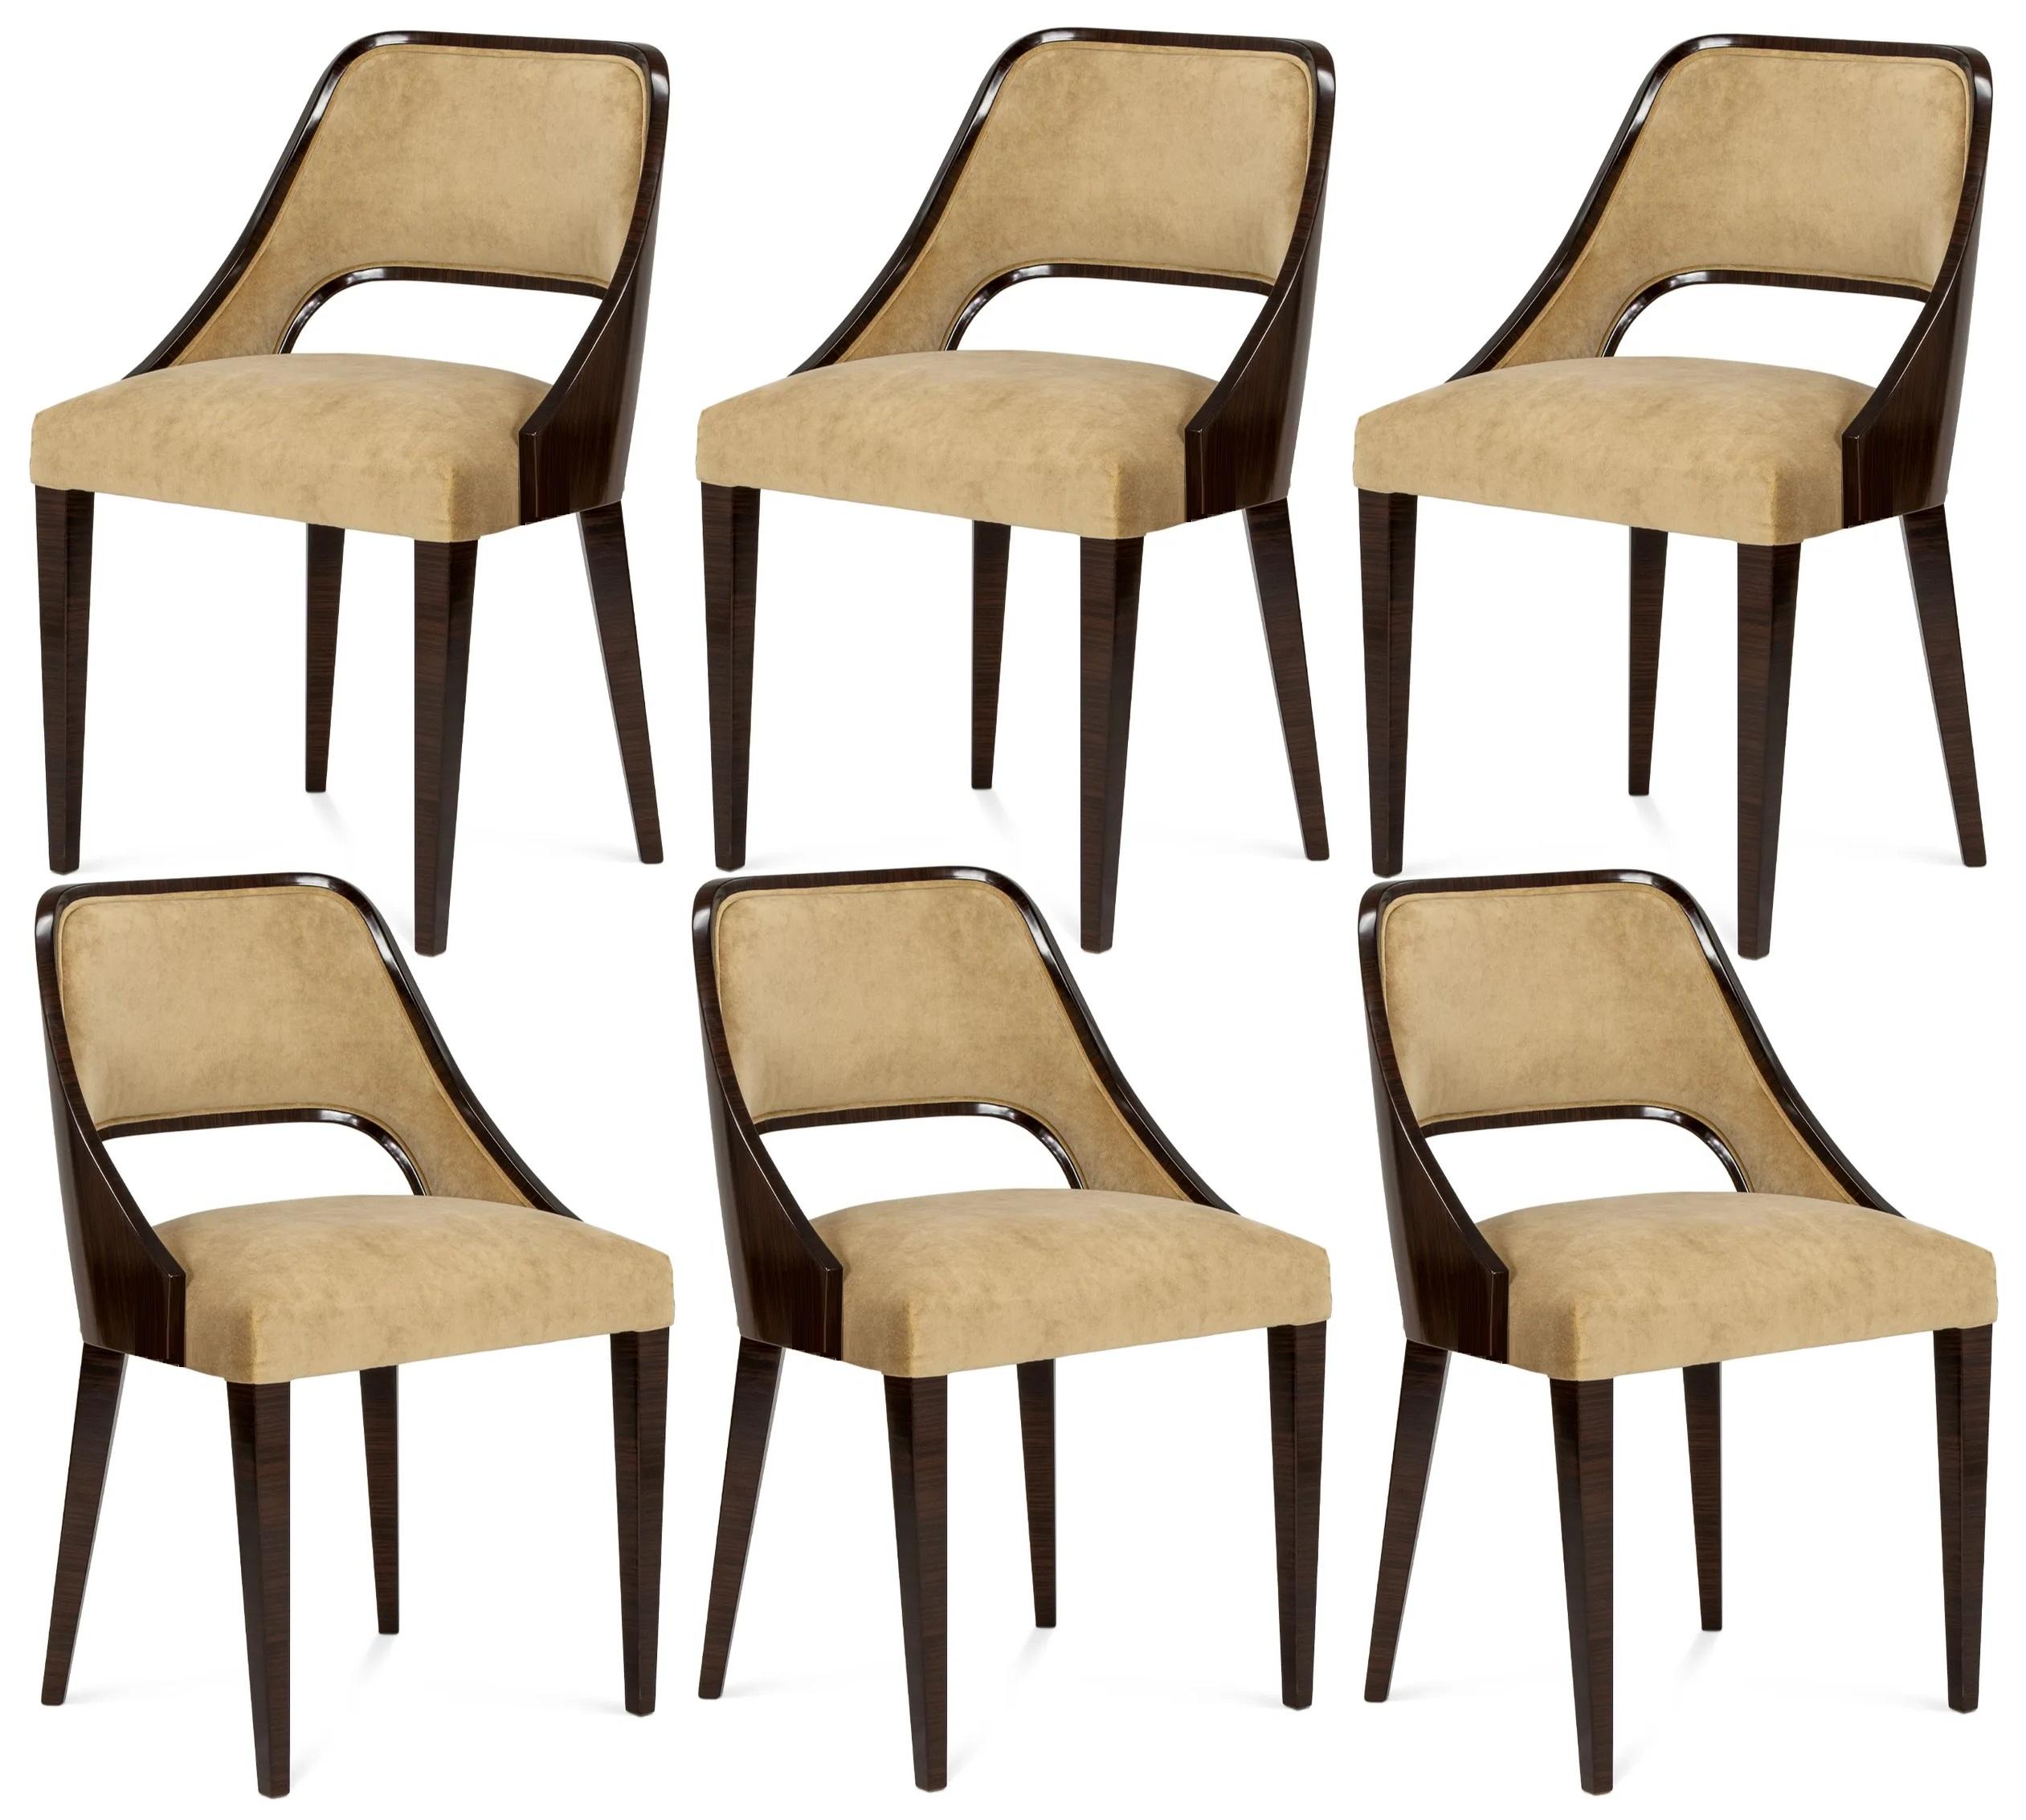 Art Deco Style Dining Chair With Back And Legs In Ebony Wood, Set of 6